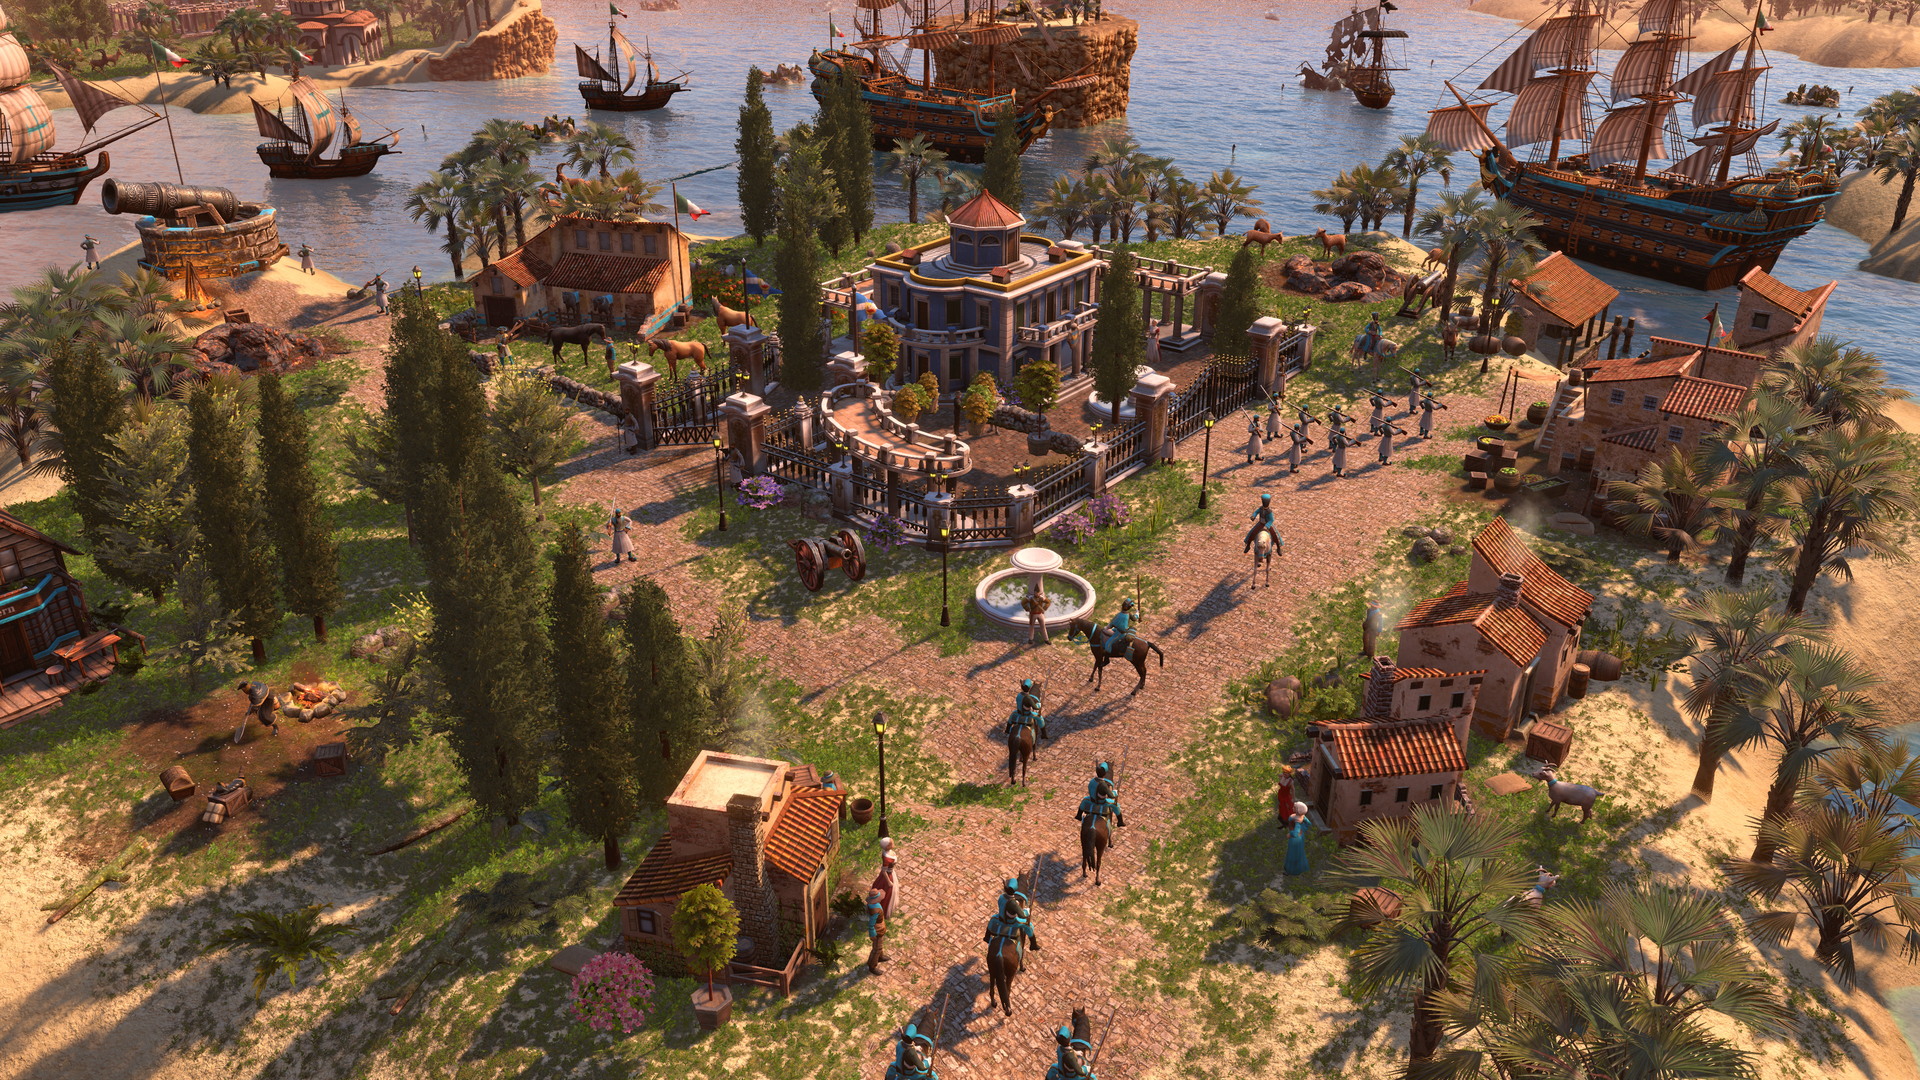 Age of Empires III: Definitive Edition - Knights of the Mediterranean - screenshot 1